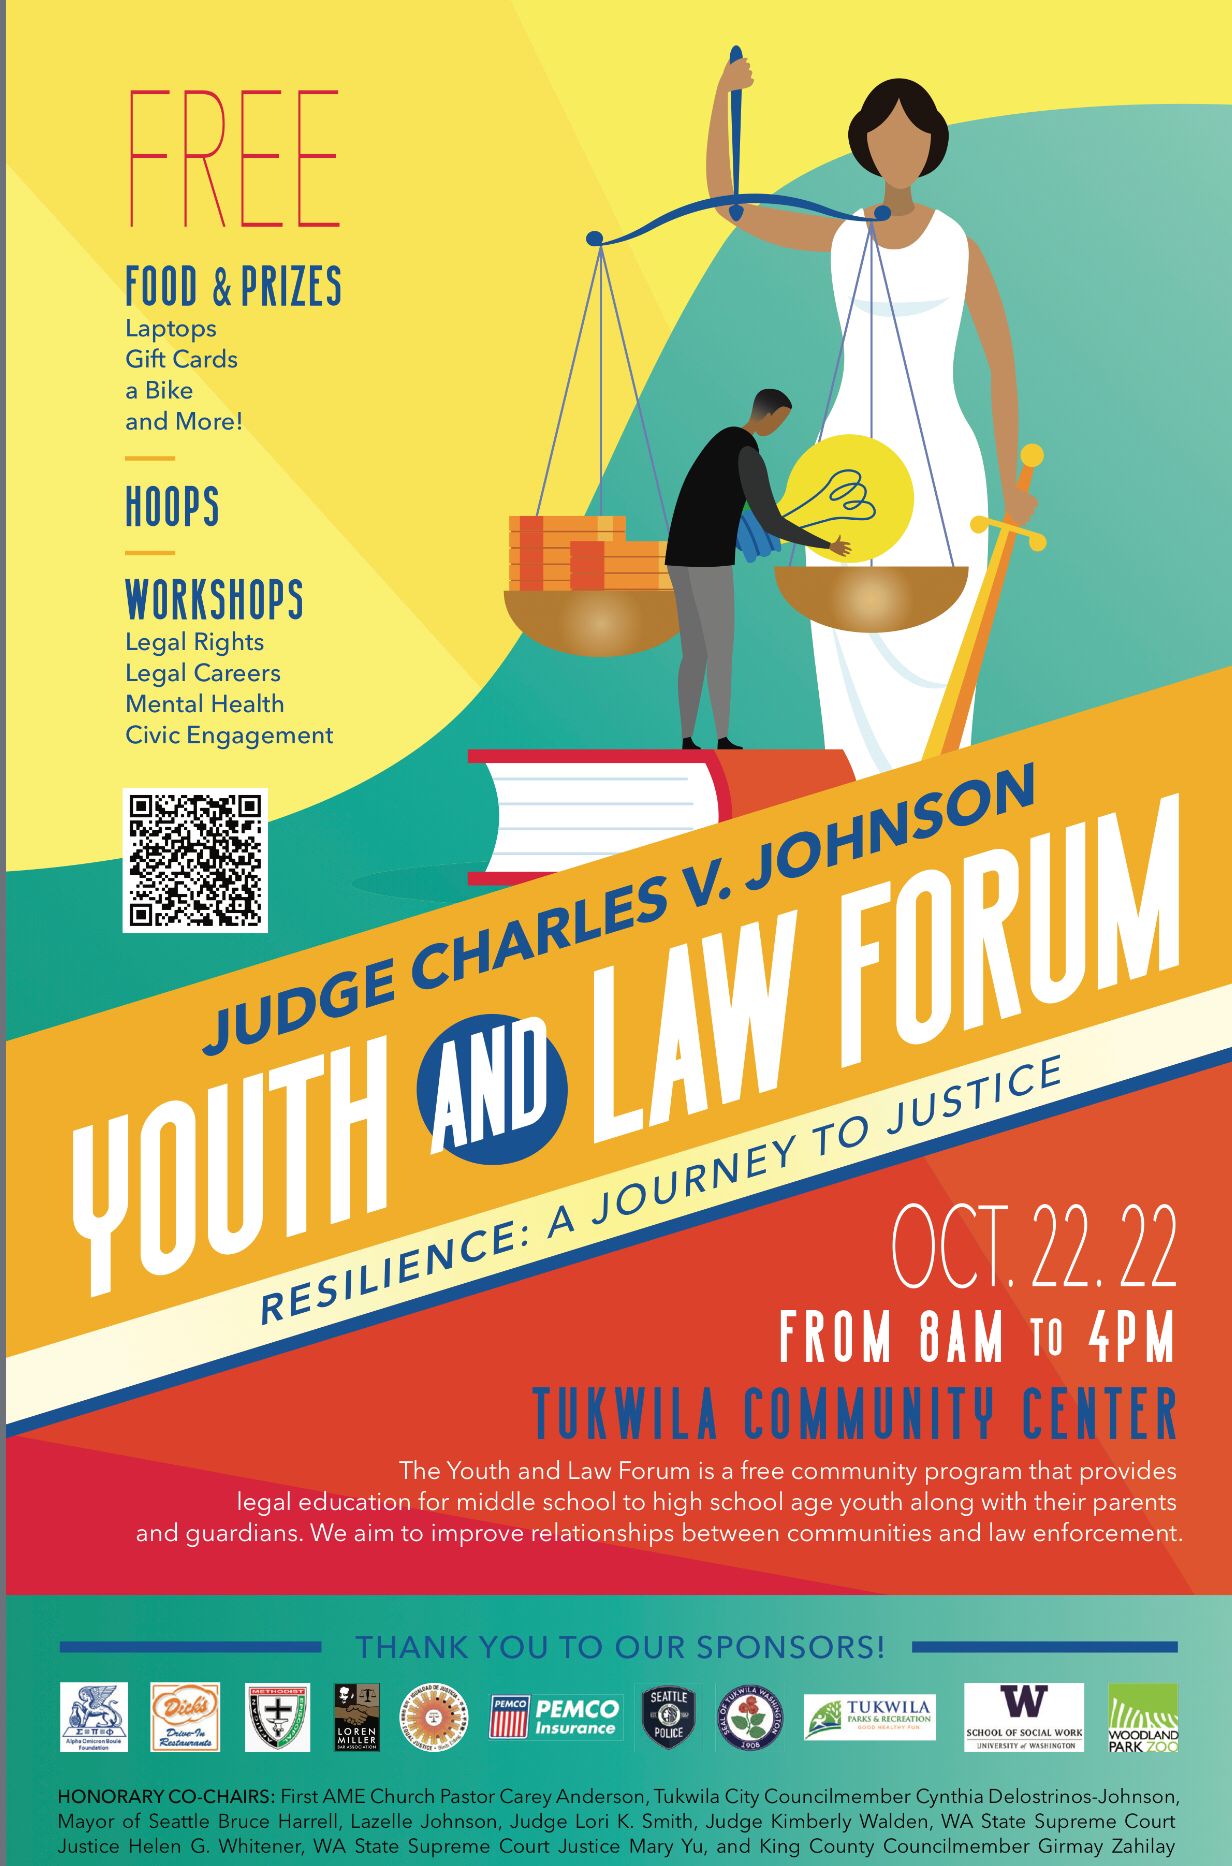 YOUTH AND LAW FORUM